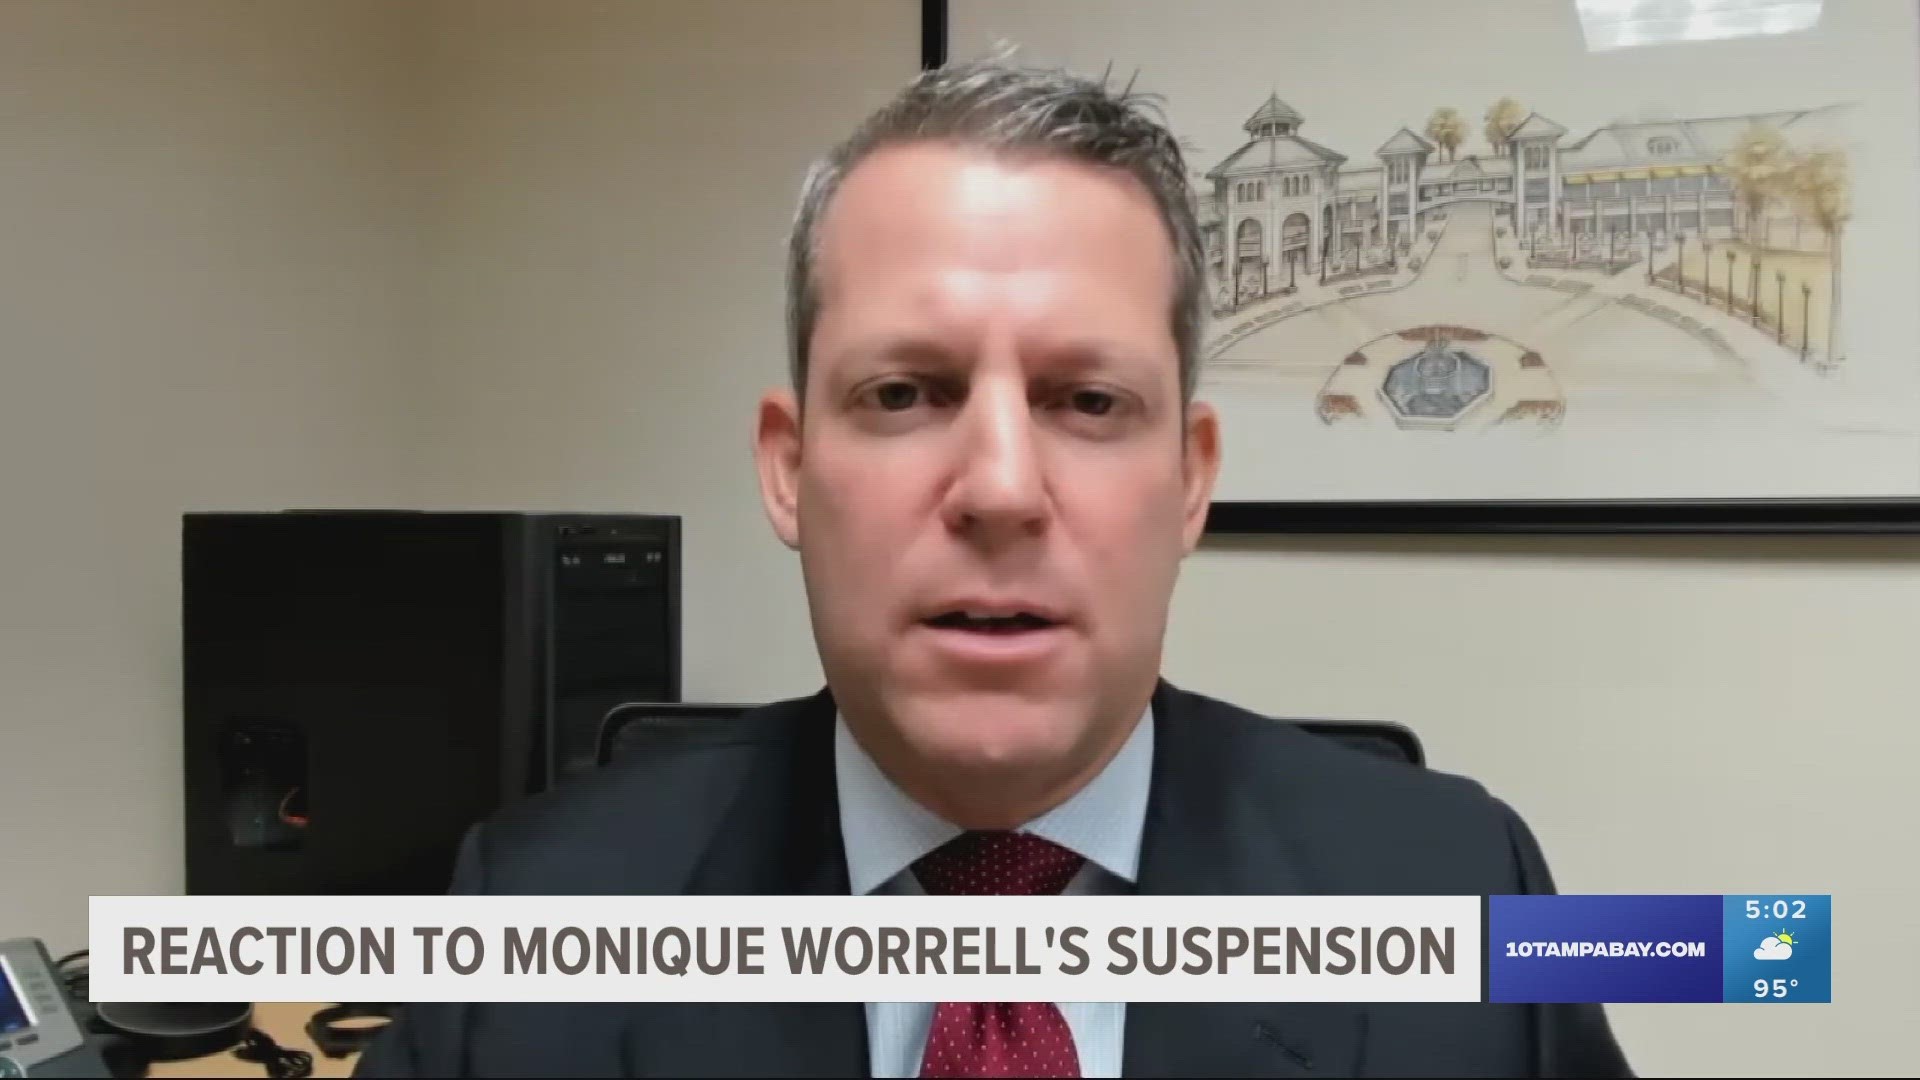 DeSantis announced State Attorney Monique Worrell's suspension on Wednesday, citing "neglect of duty and incompetence."